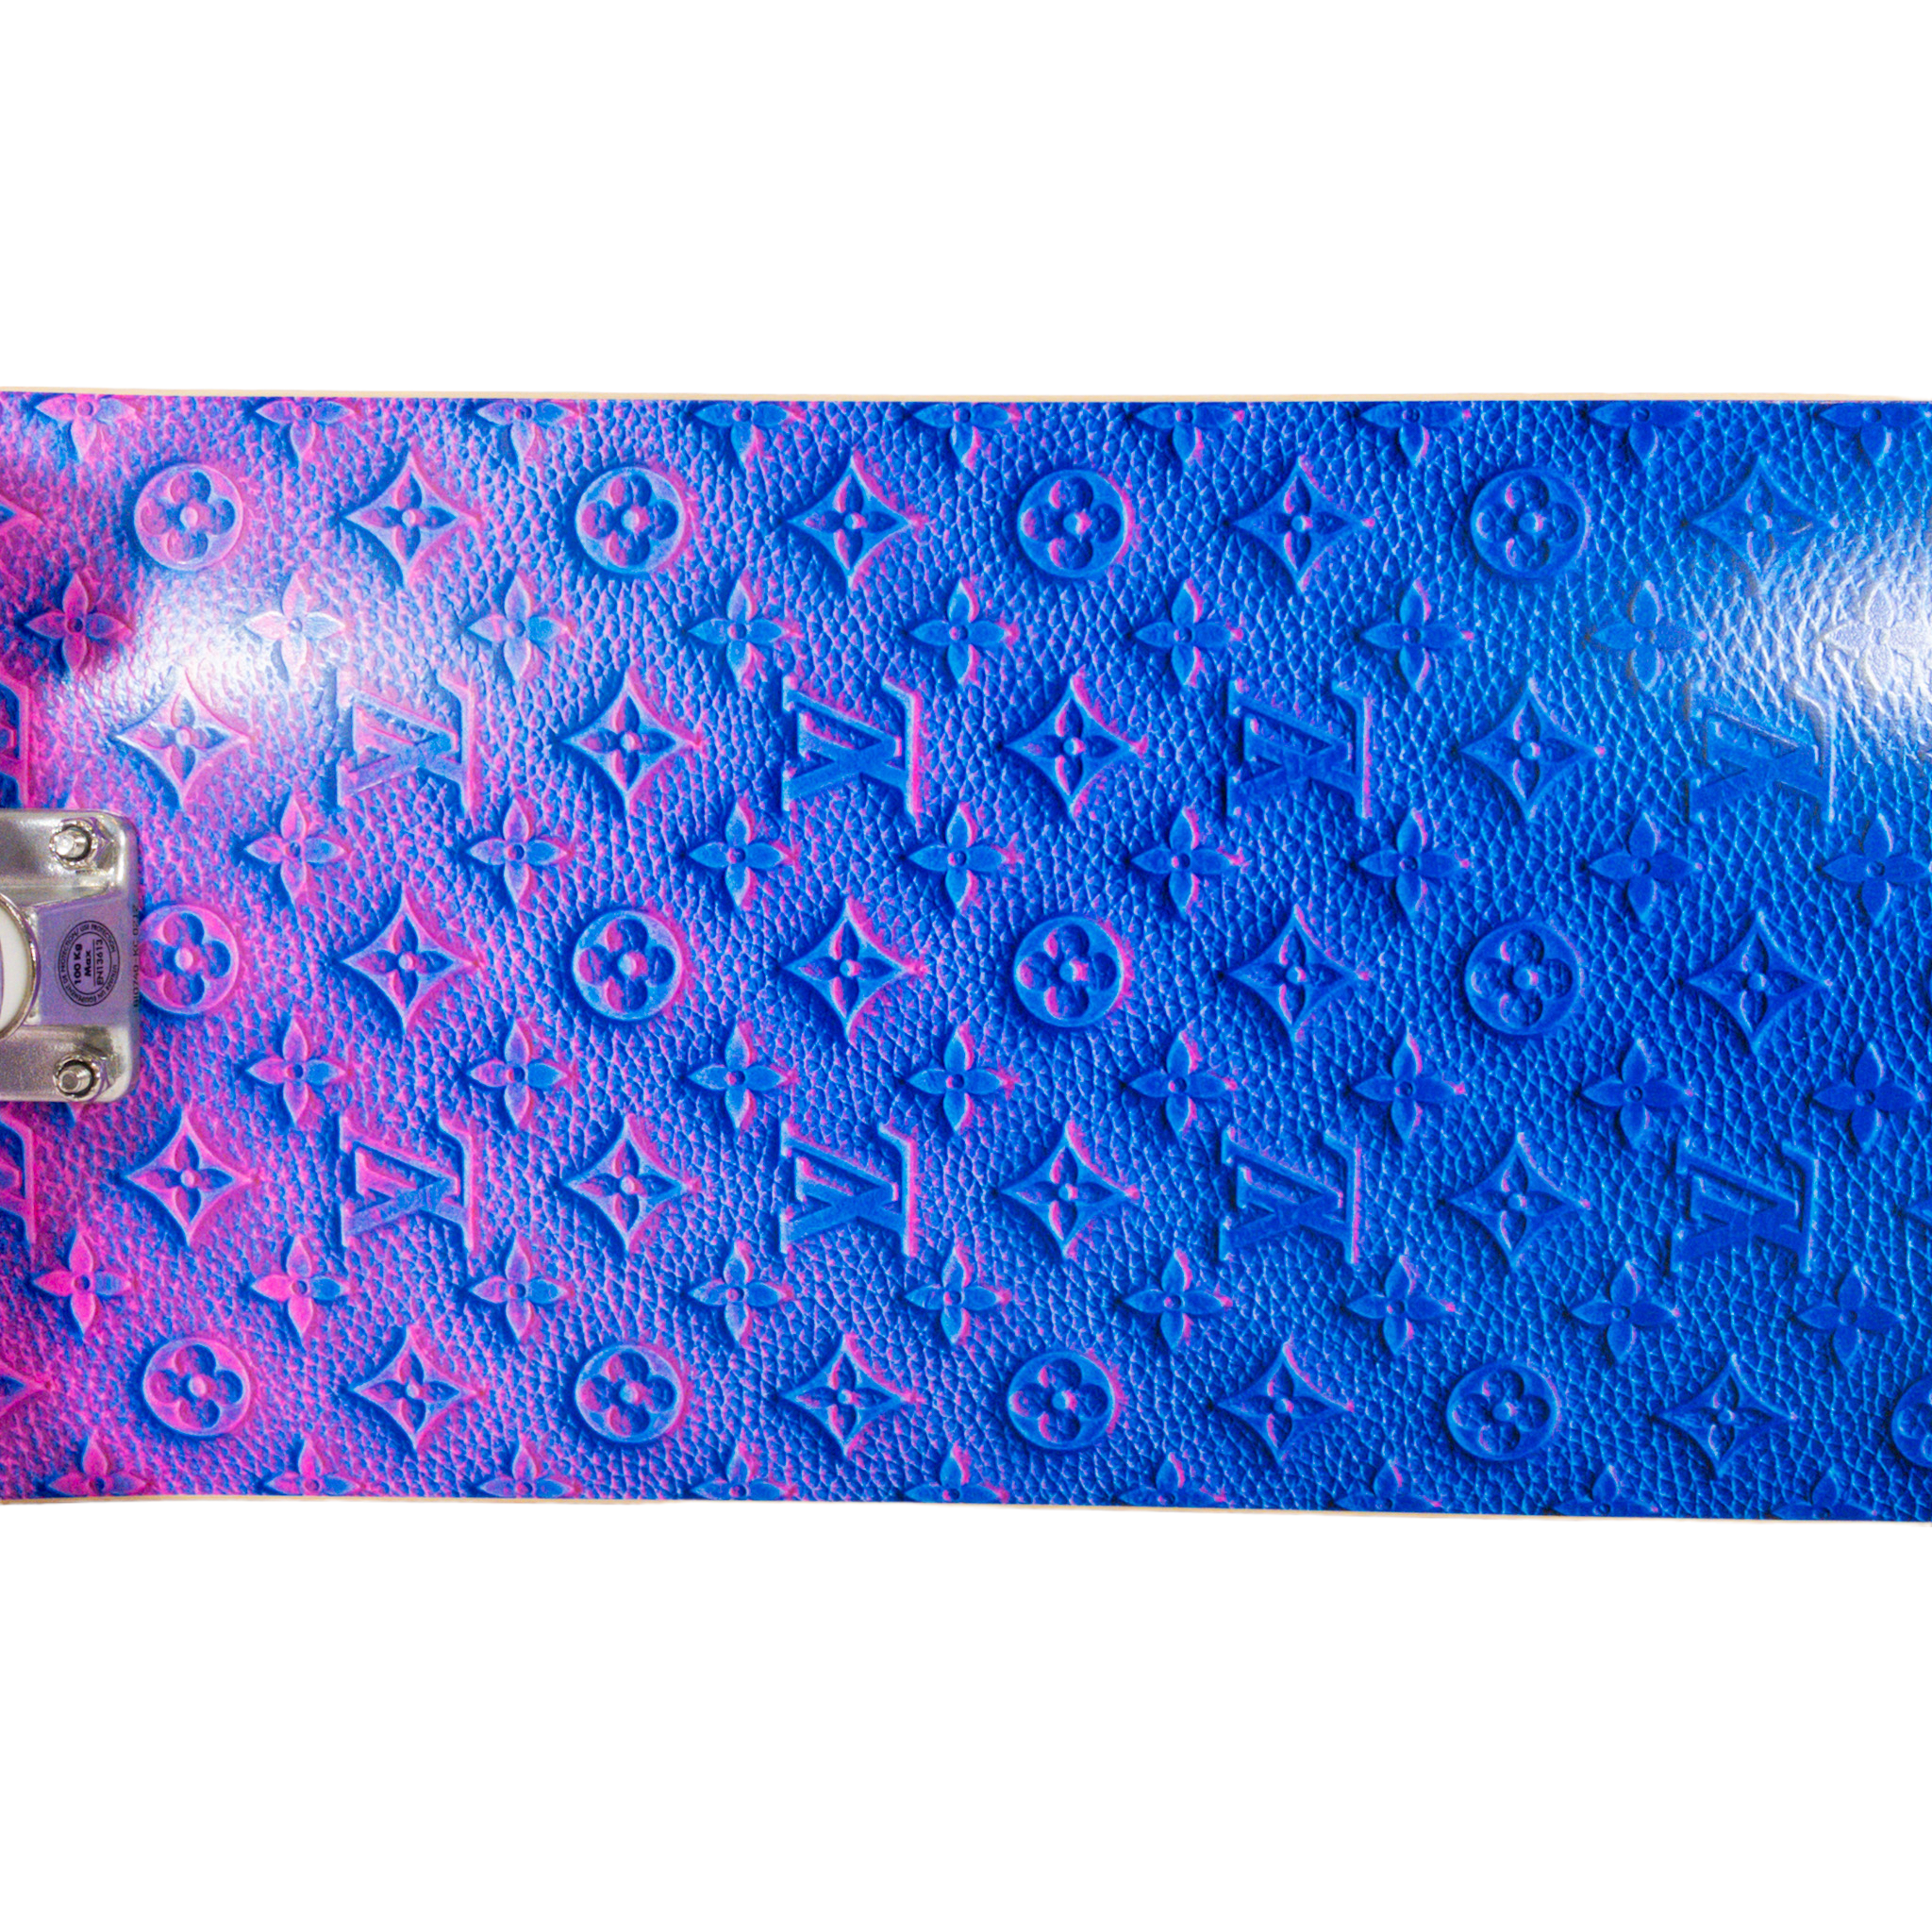 Louis Vuitton & Virgil Abloh, Multicolor Watercolor Monogram Wood,  Aluminum, and Polymer Skateboard, 2021, Modern Collectibles, 2022